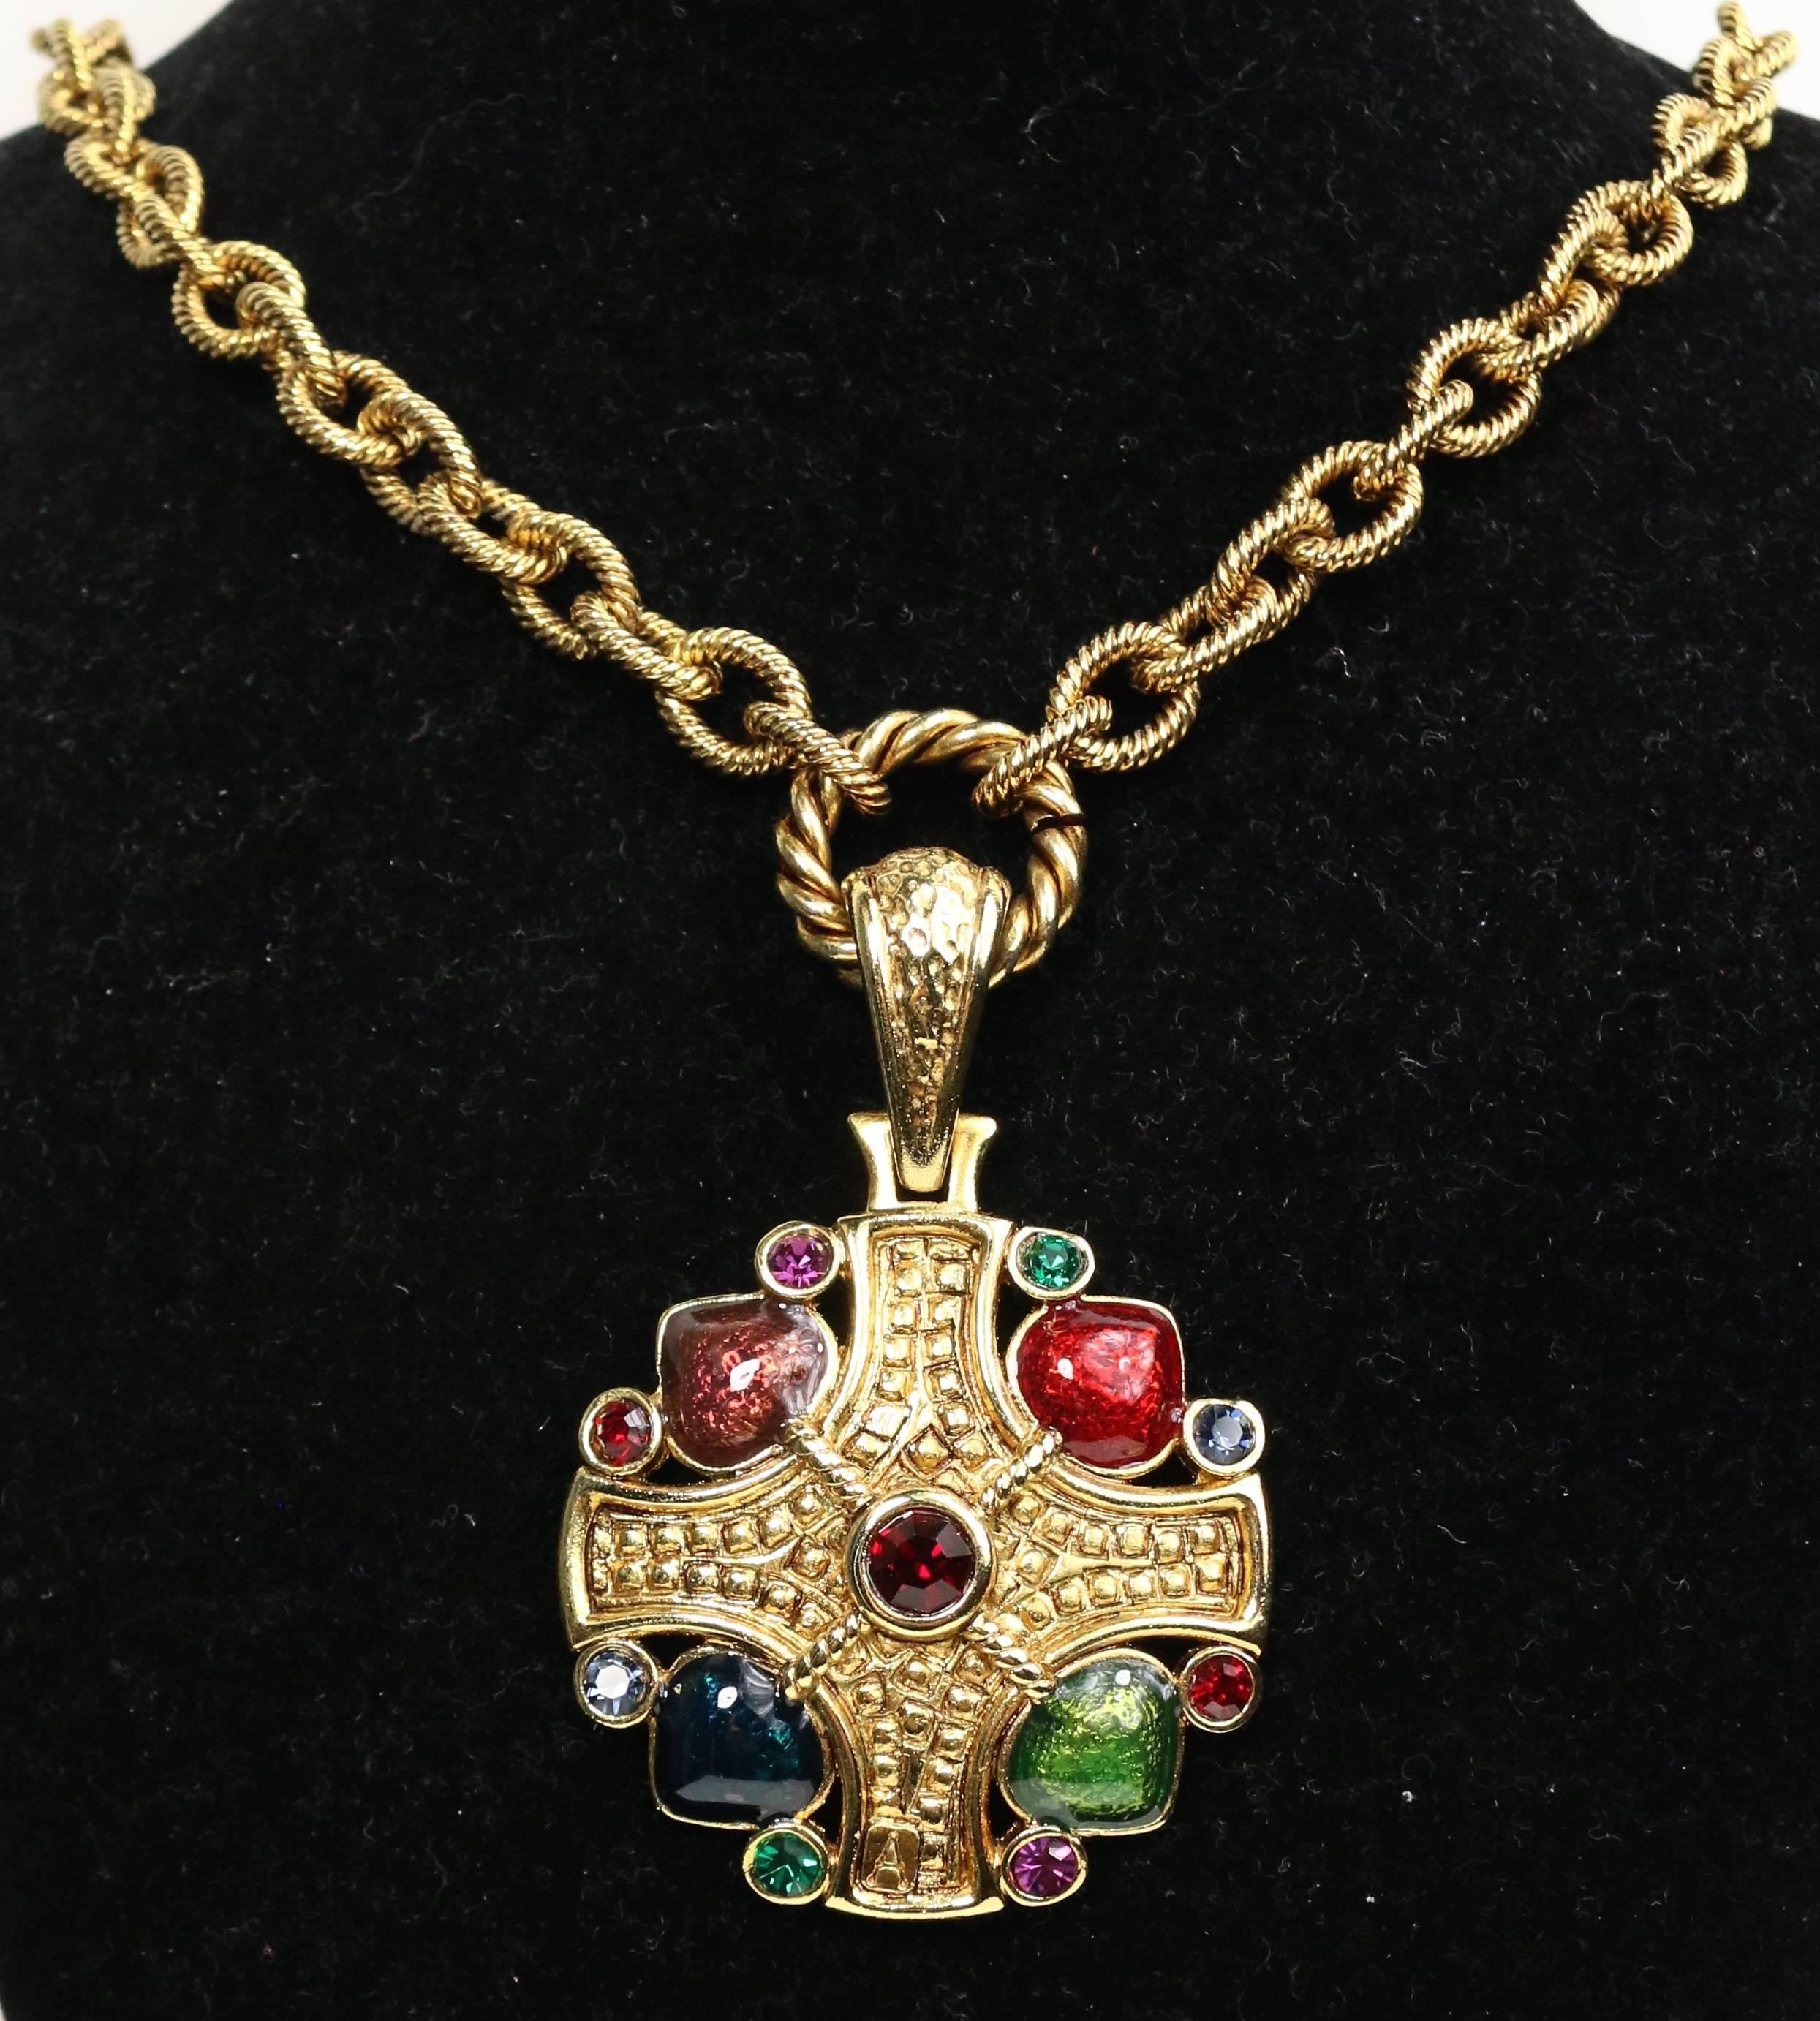 - Vintage 80s gold toned setting cross with multi colour cabochons and rhinestones pendant gold link chain necklace. The pendant is heavy and its a rare design! Bold and gold with colour stones necklace is always in style! 

- Pendant height: 2